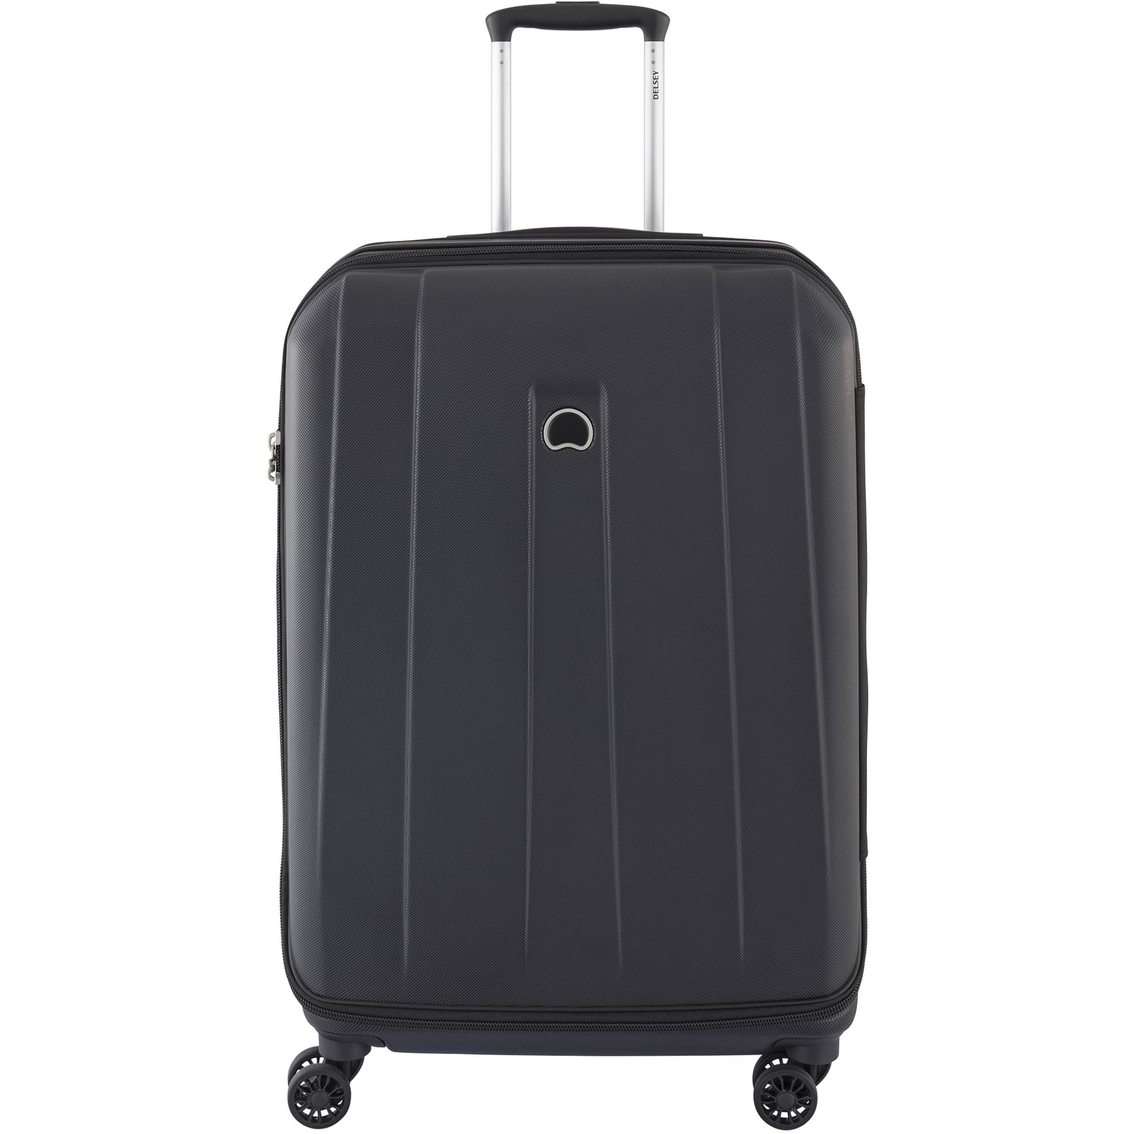 Delsey Luggage Shadow 3.0 Hardside 21 In. Carry-on Spinner | Atg ...